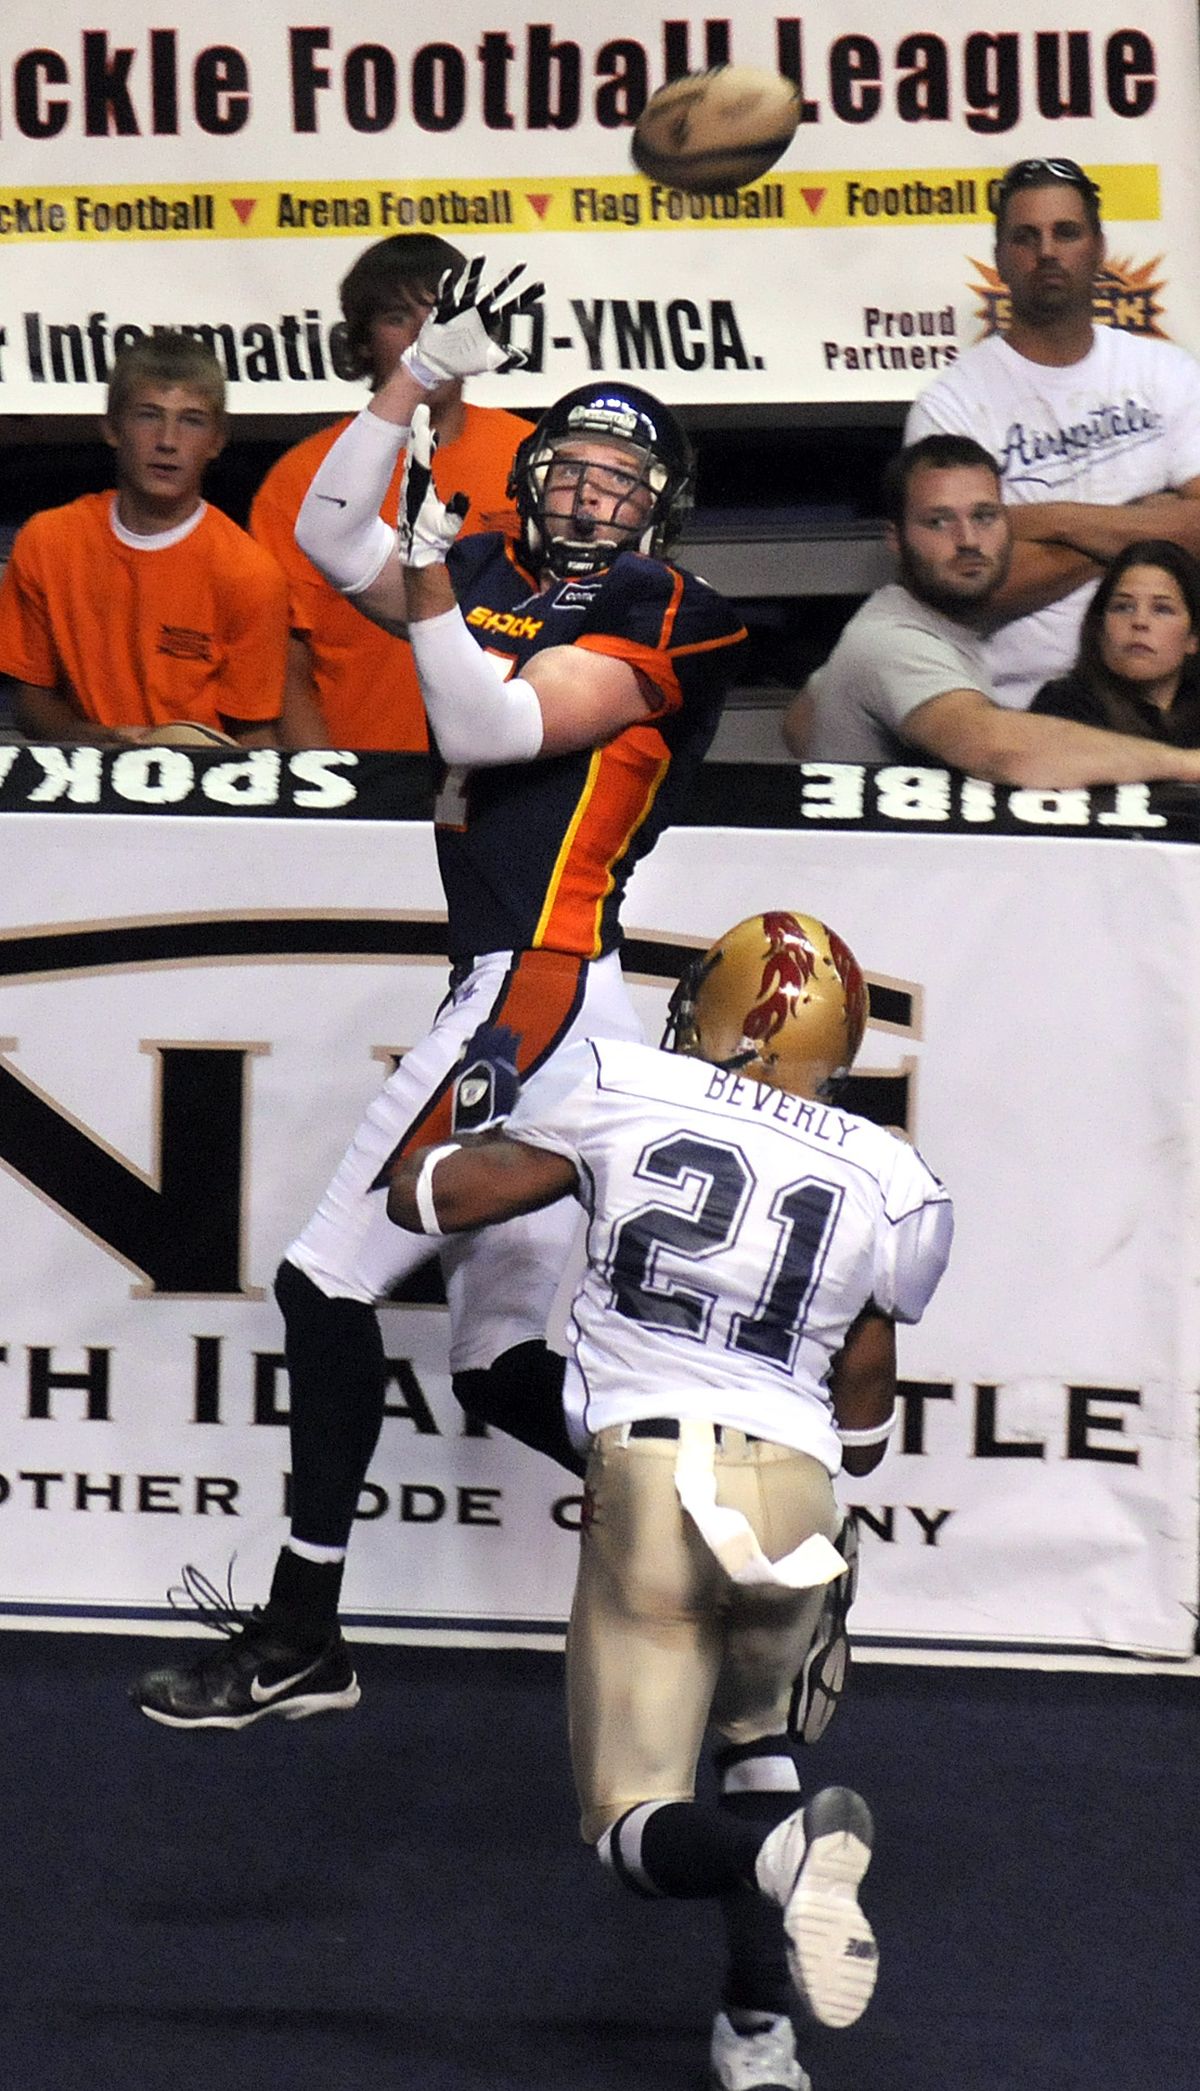 Spokane’s Andy Olson attempts a catch in the end zone. (Dan Pelle / The Spokesman-Review)